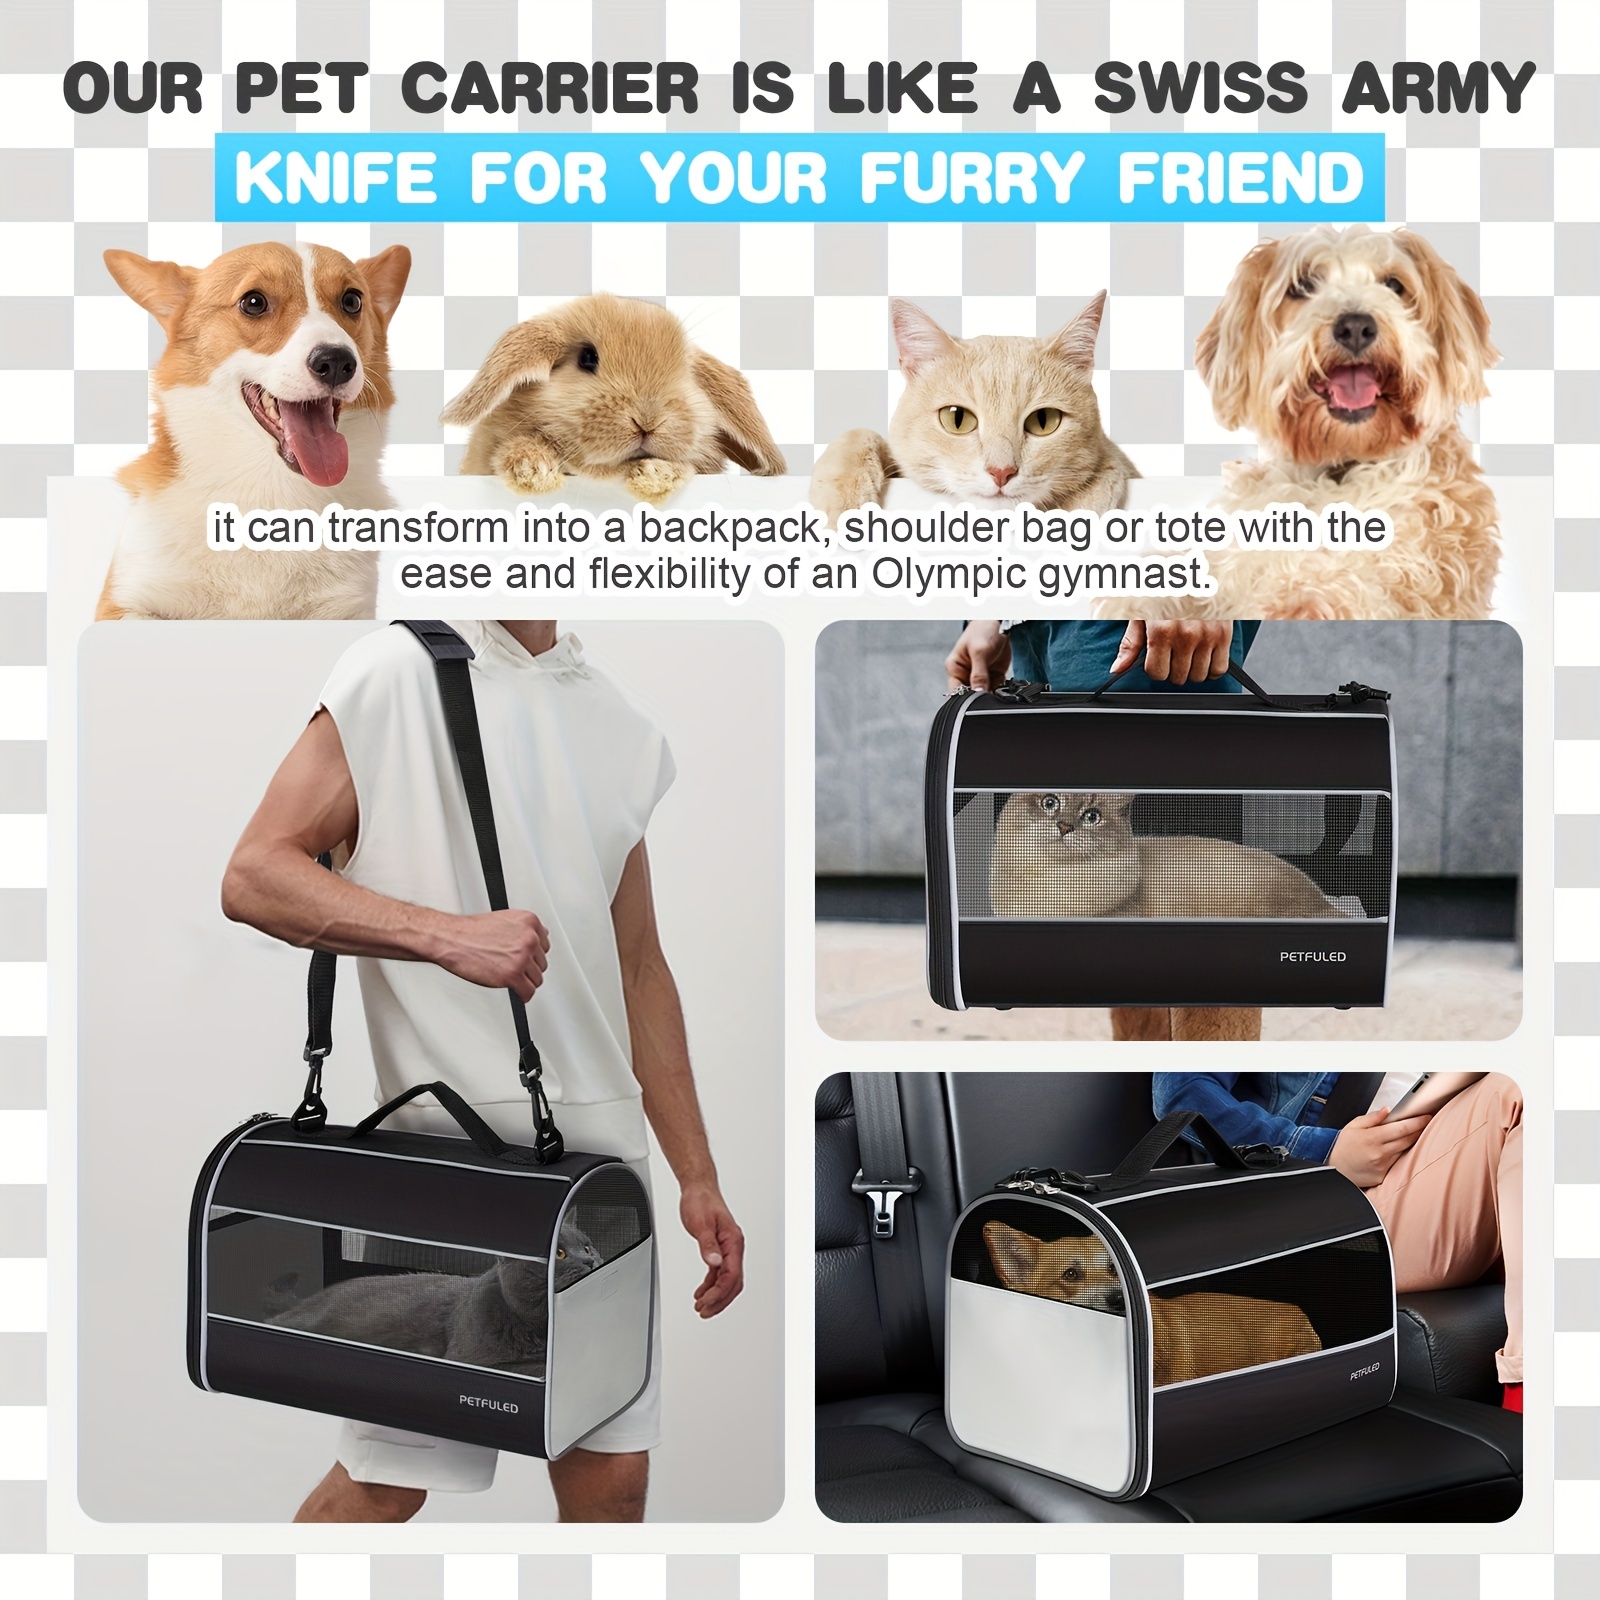 Cat Carrier TSA Airline Approved Pet Carrier Cat Carrier Bag with Big Space for Small Medium Cats Small Dog Carrier with 5 Mesh Windows, 4 Open